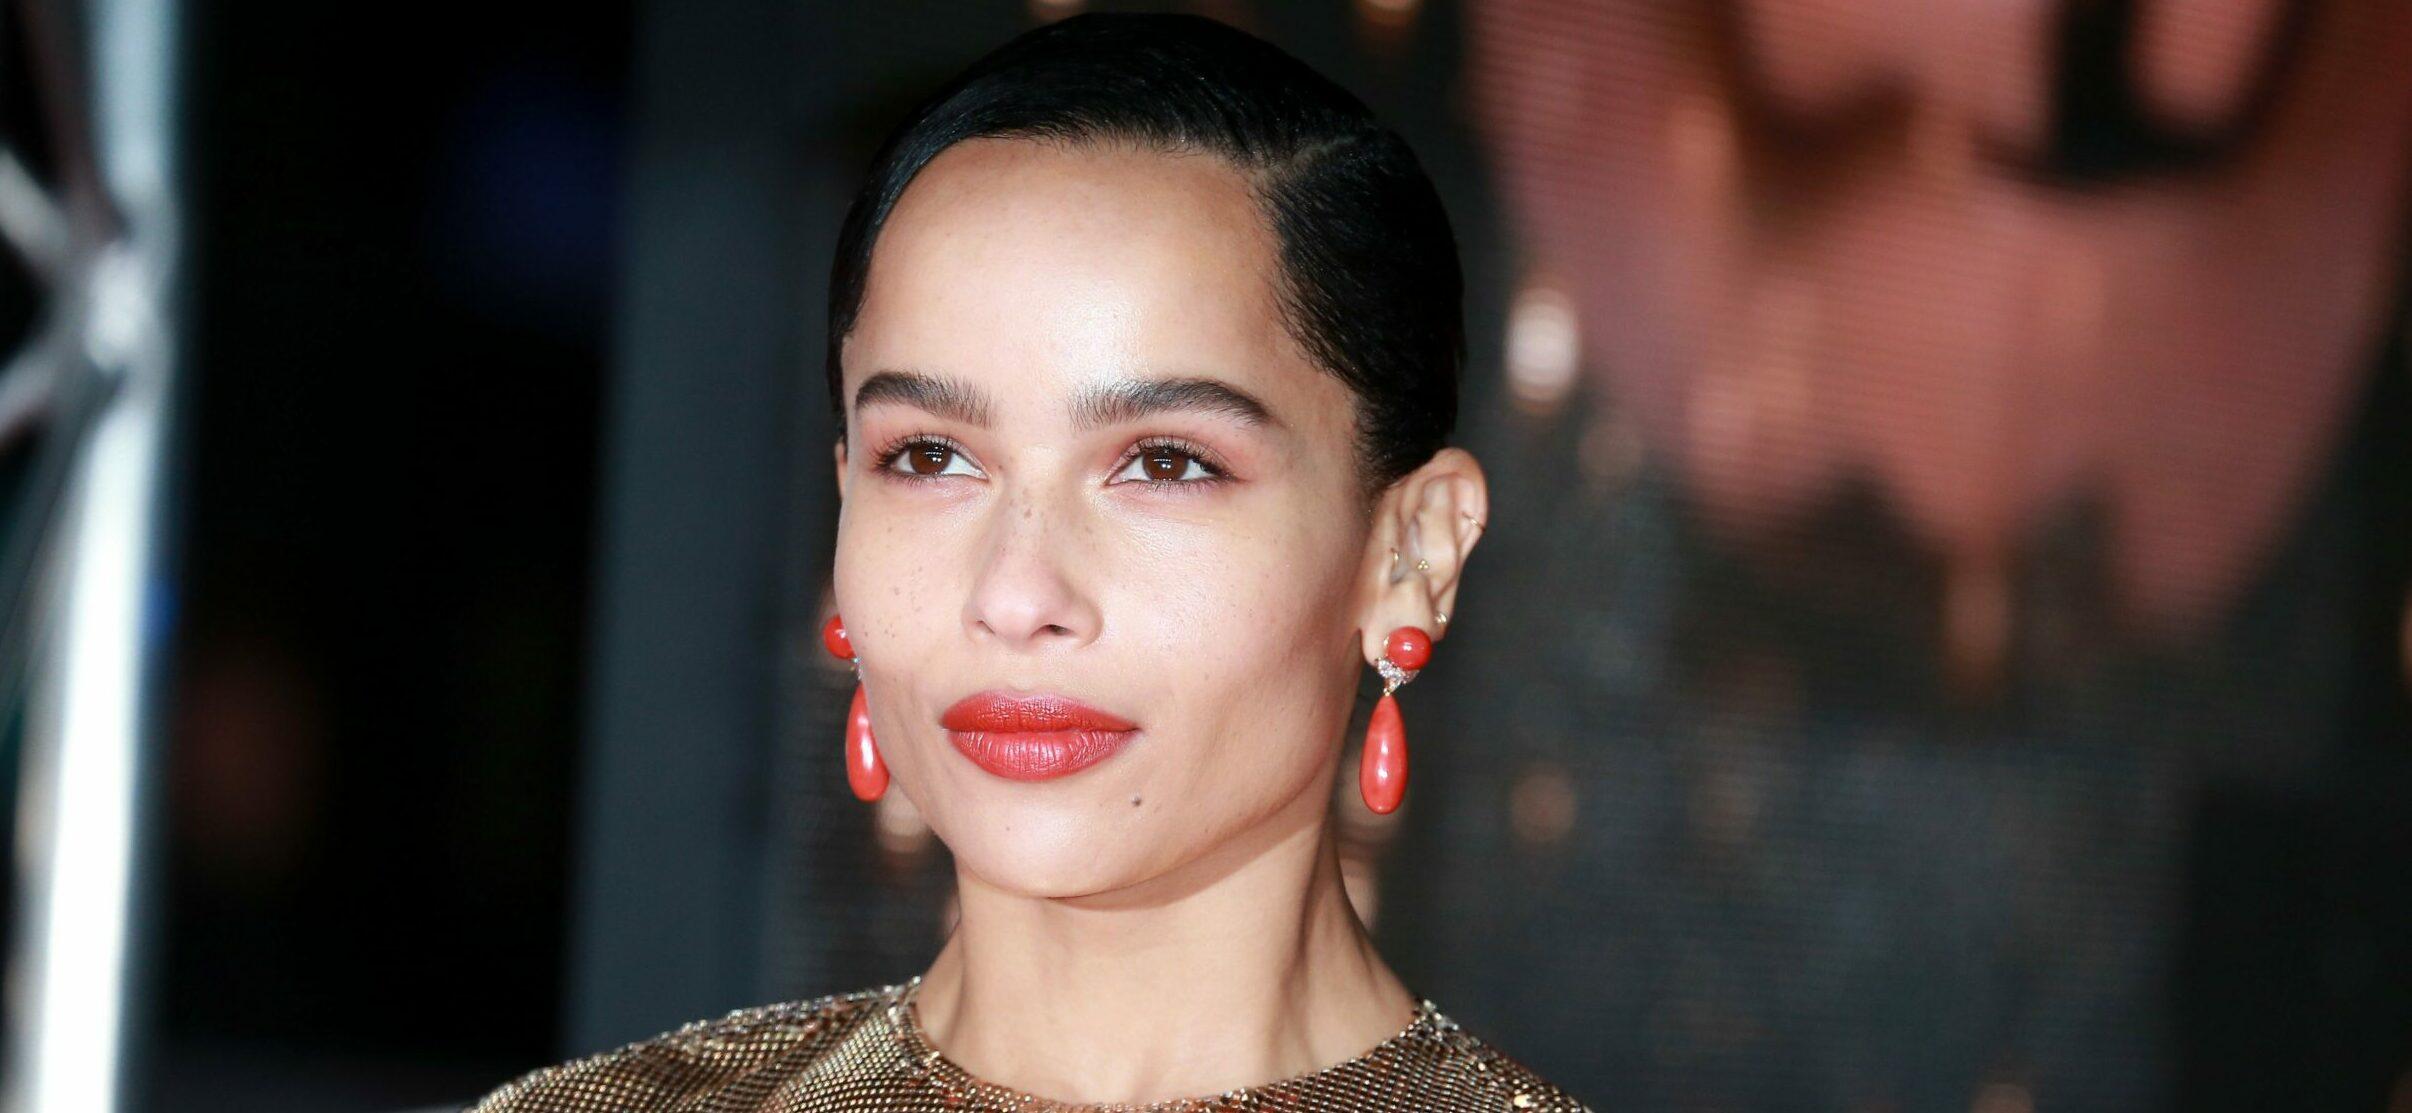 73rd British Academy Film Awards at the Royal Albert Hall in London, UK. 02 Feb 2020 Pictured: Zoe Kravitz. Photo credit: Fred Duval/MEGA TheMegaAgency.com +1 888 505 6342 (Mega Agency TagID: MEGA600365_013.jpg) [Photo via Mega Agency]